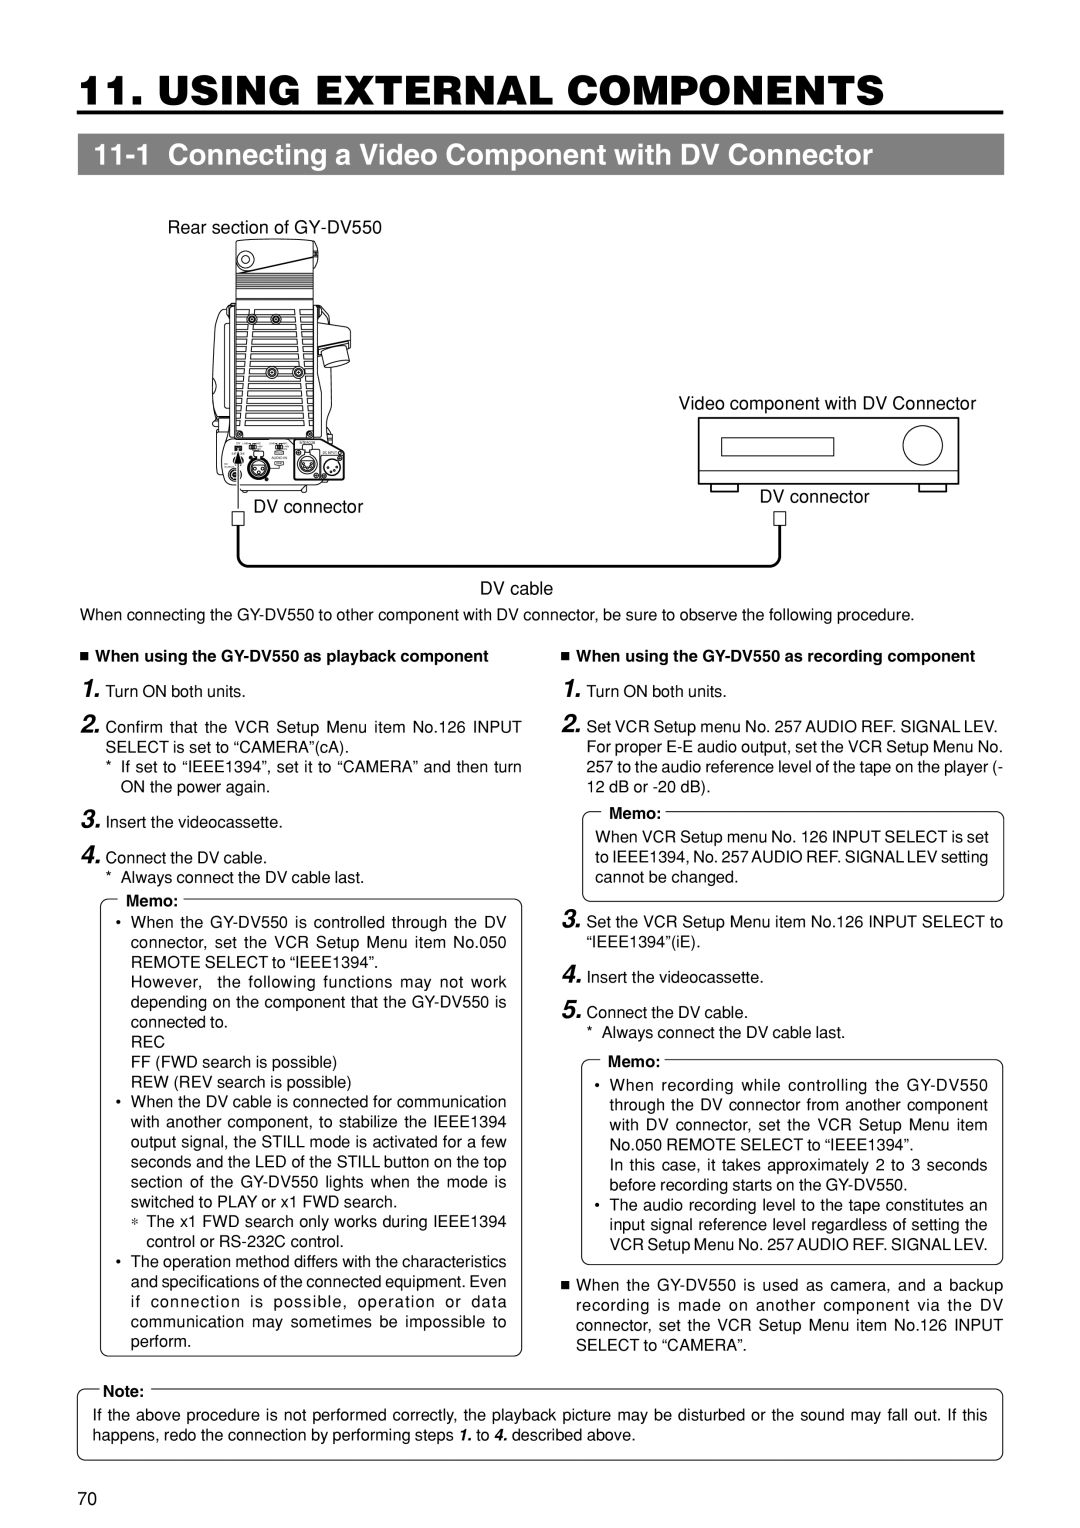 JVC GY-DV550U instruction manual Using External Components, Connecting a Video Component with DV Connector 